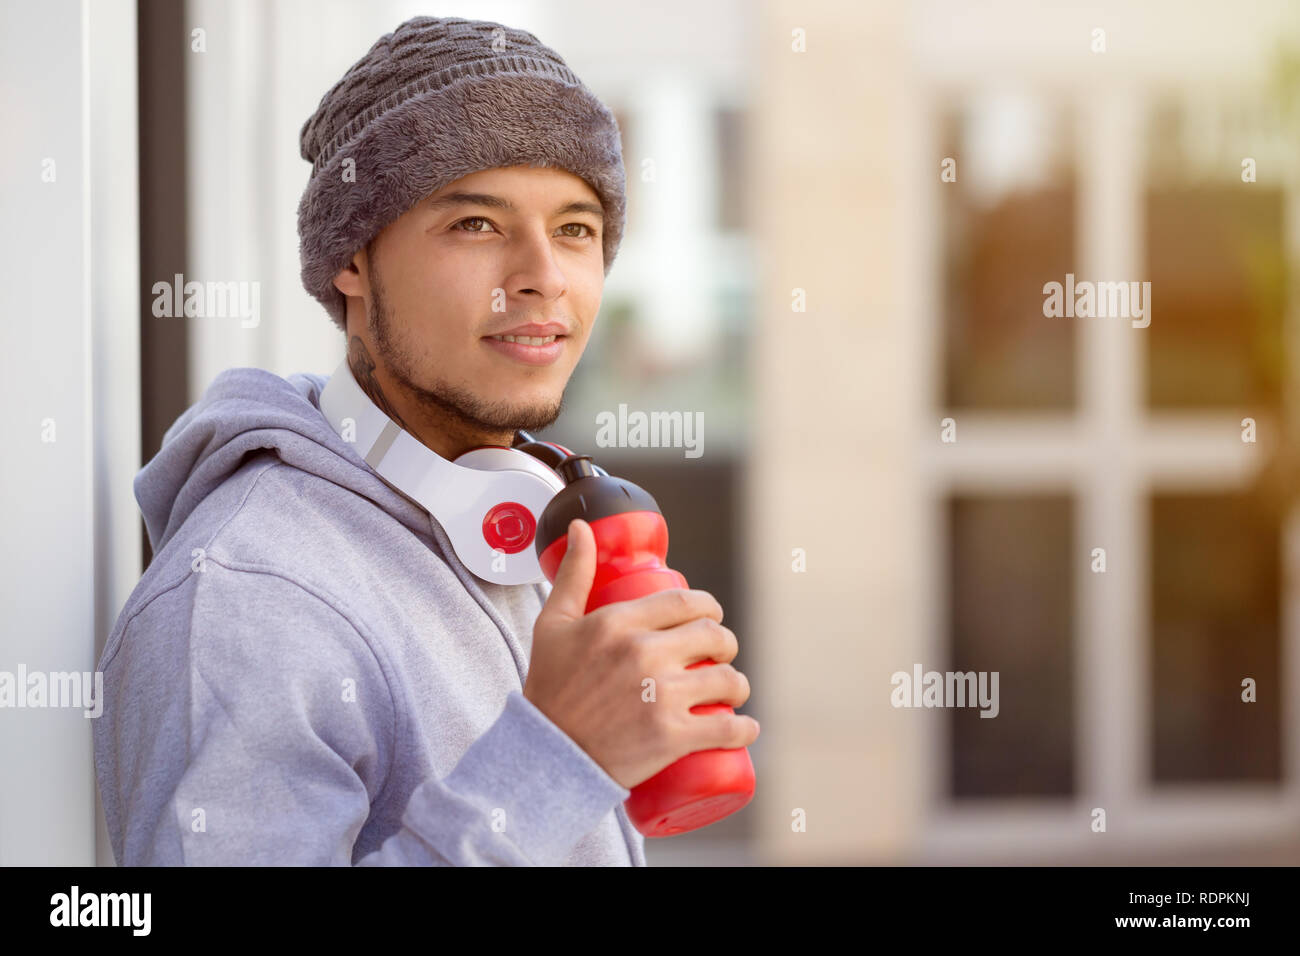 Sports training young latin man drinking water looking up thinking runner copyspace copy space outdoor Stock Photo